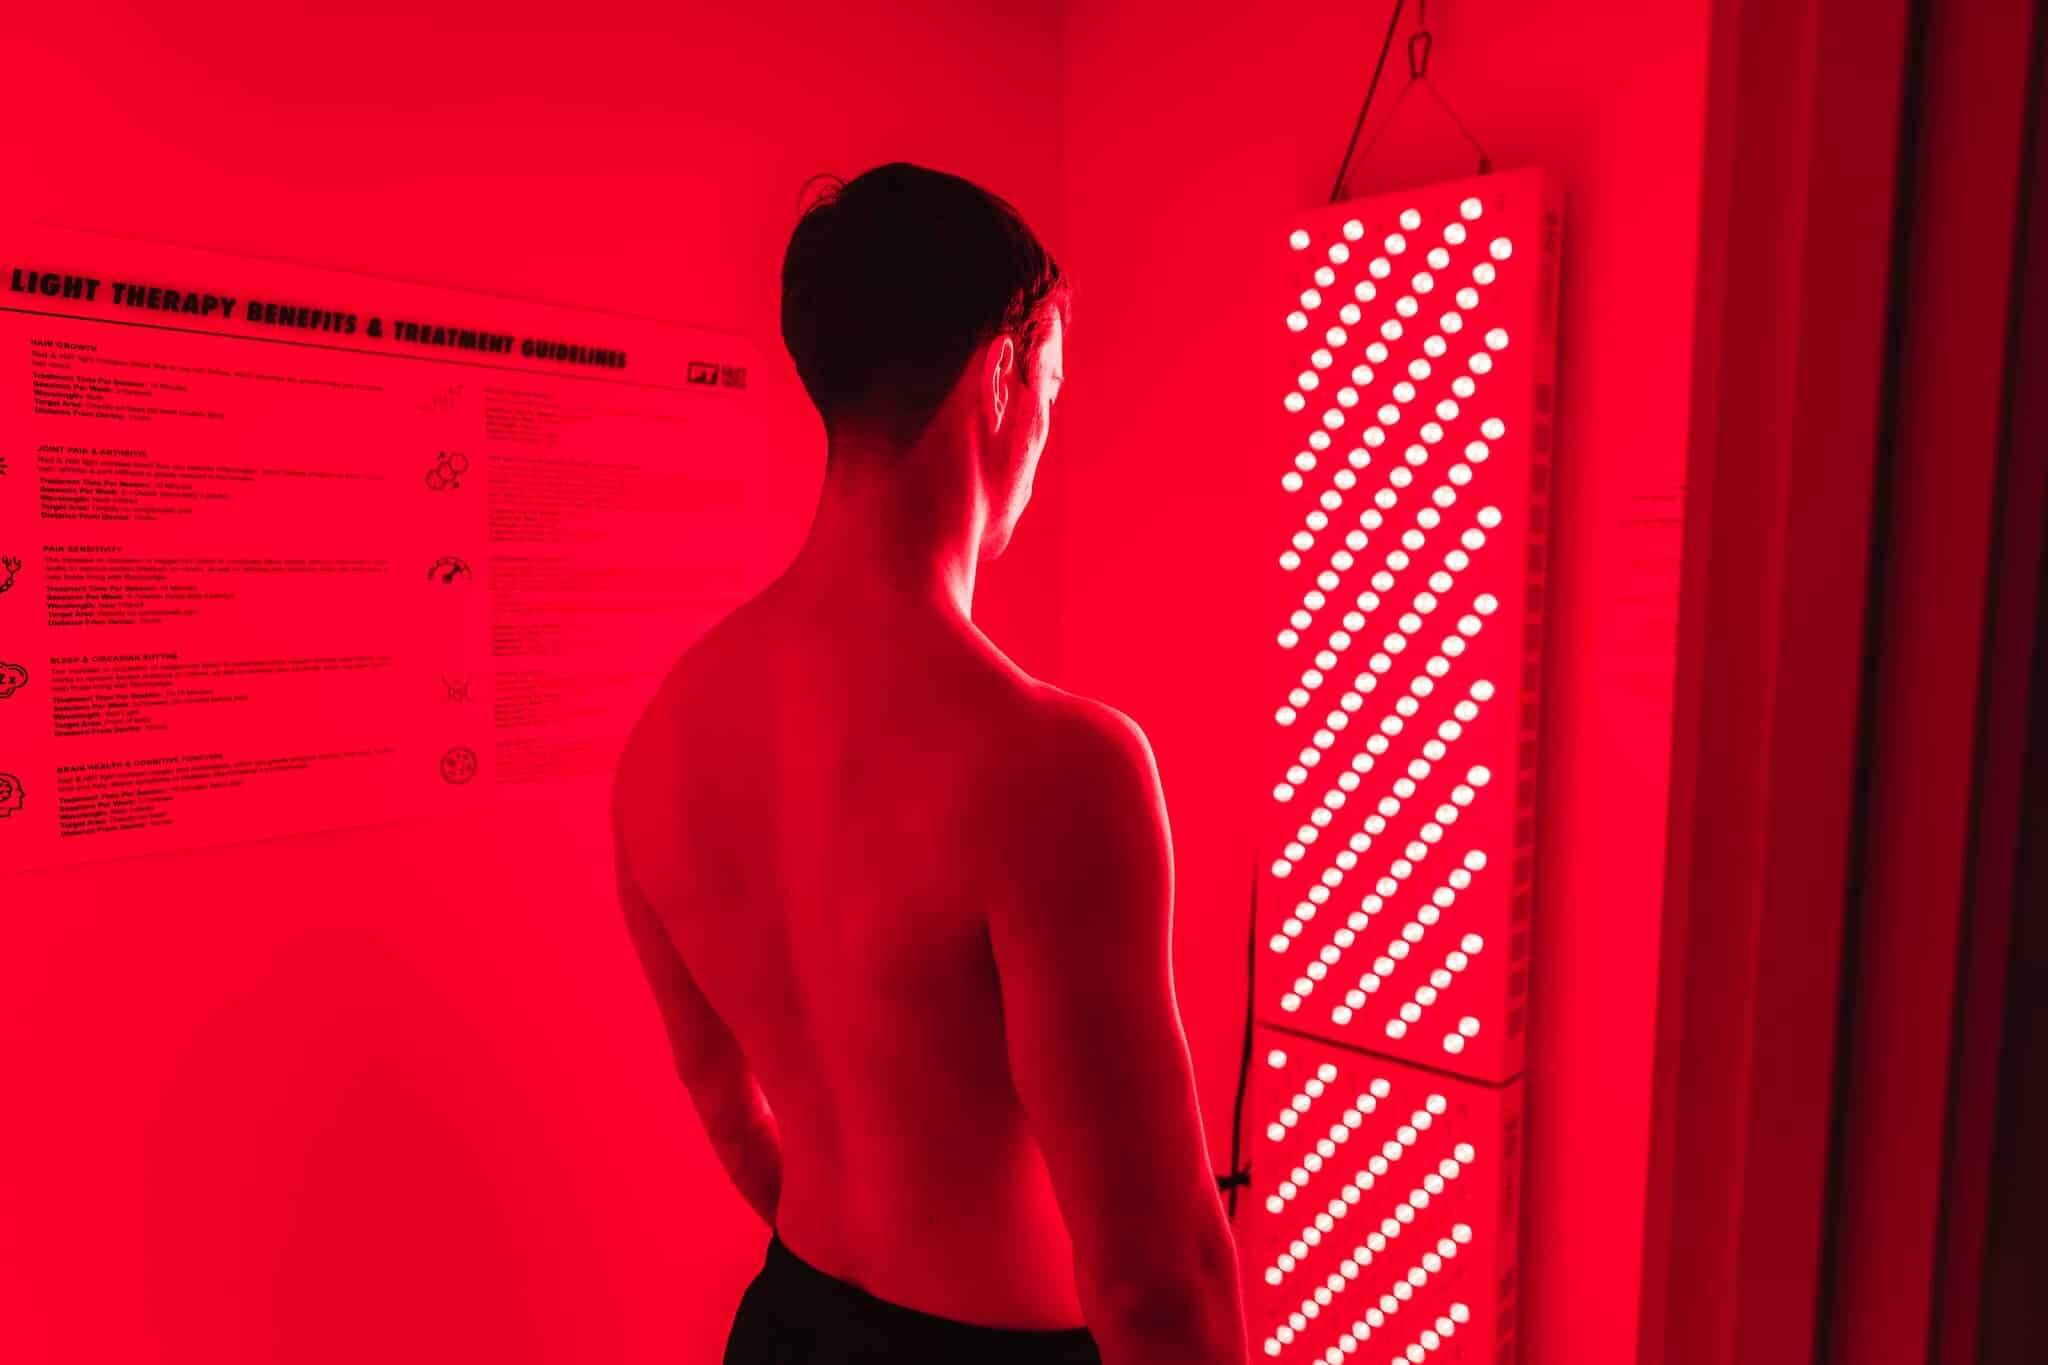 Best Red Light Therapy Devices: Top 5 Products by Experts - Study Finds